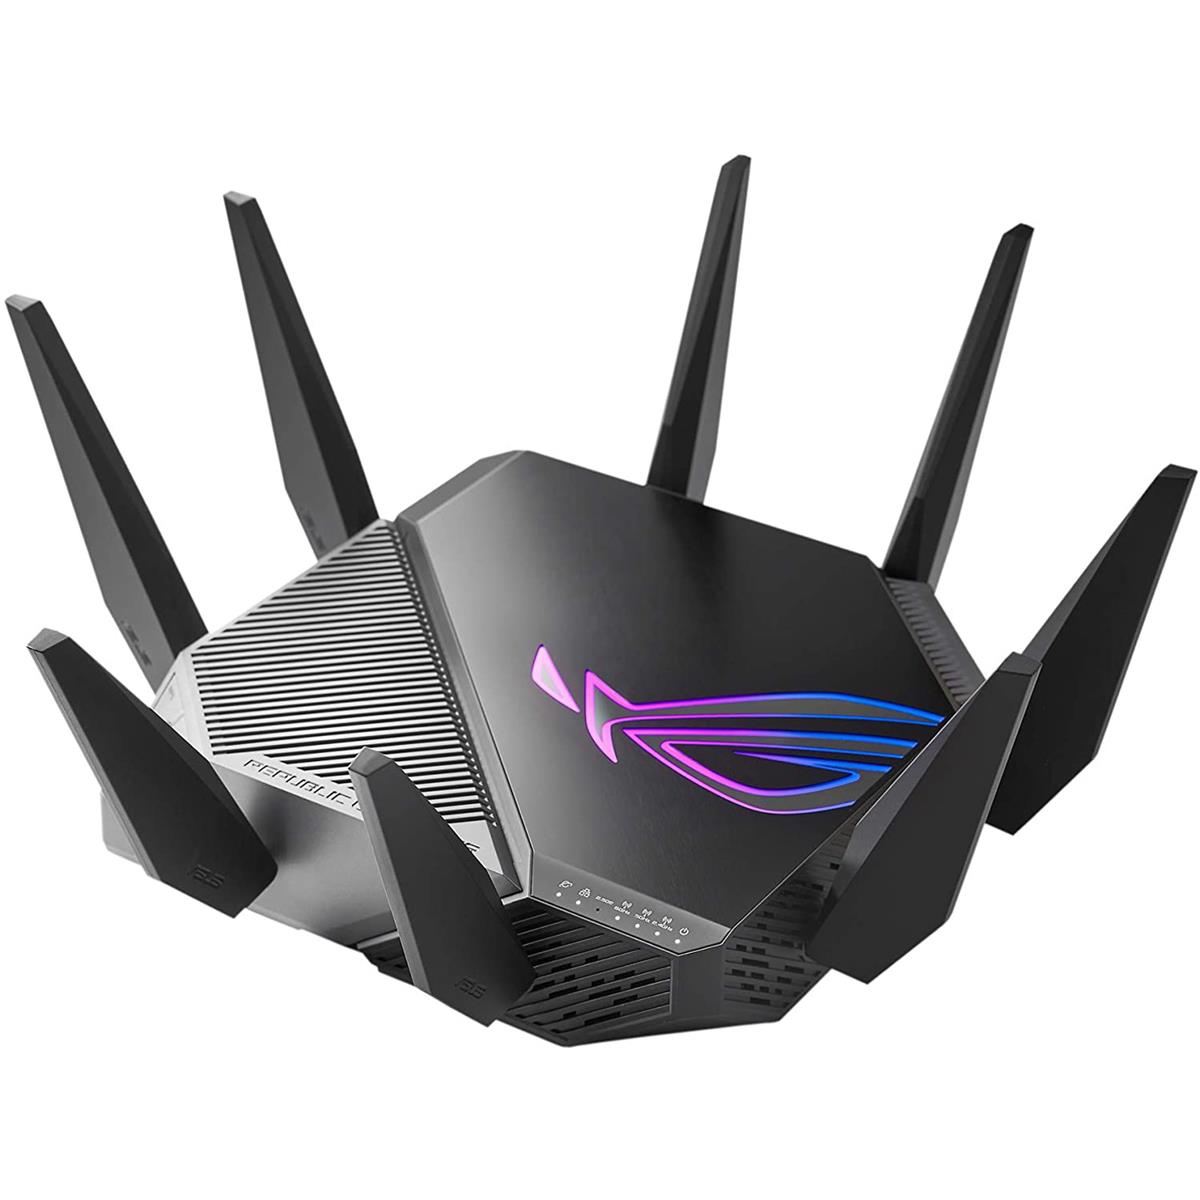 Asus ROG Rapture GT-AXE11000 Wireless Tri-Band Wi-Fi Gigabit Gaming Router $350 + free s/h